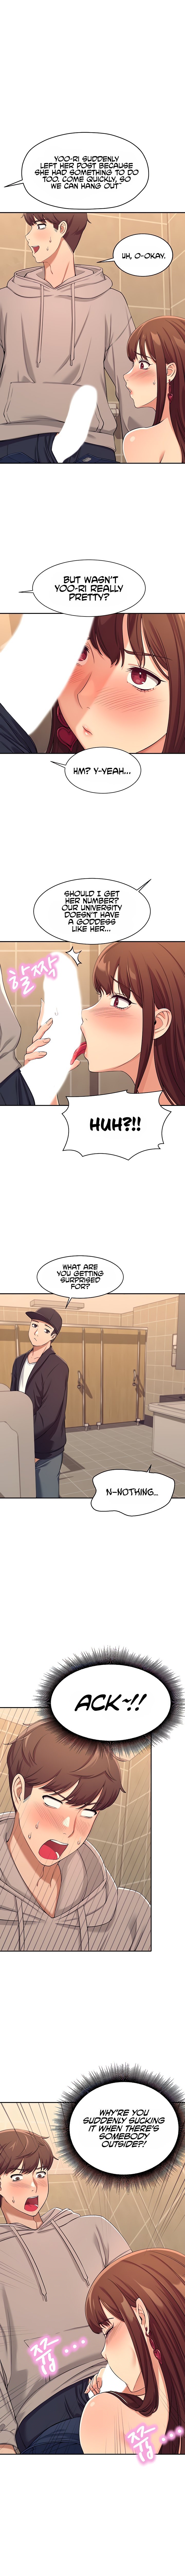 [OB, Overtime Sloth] Is There No Goddess in My College? Ch.13/? [English] [Manhwa PDF]